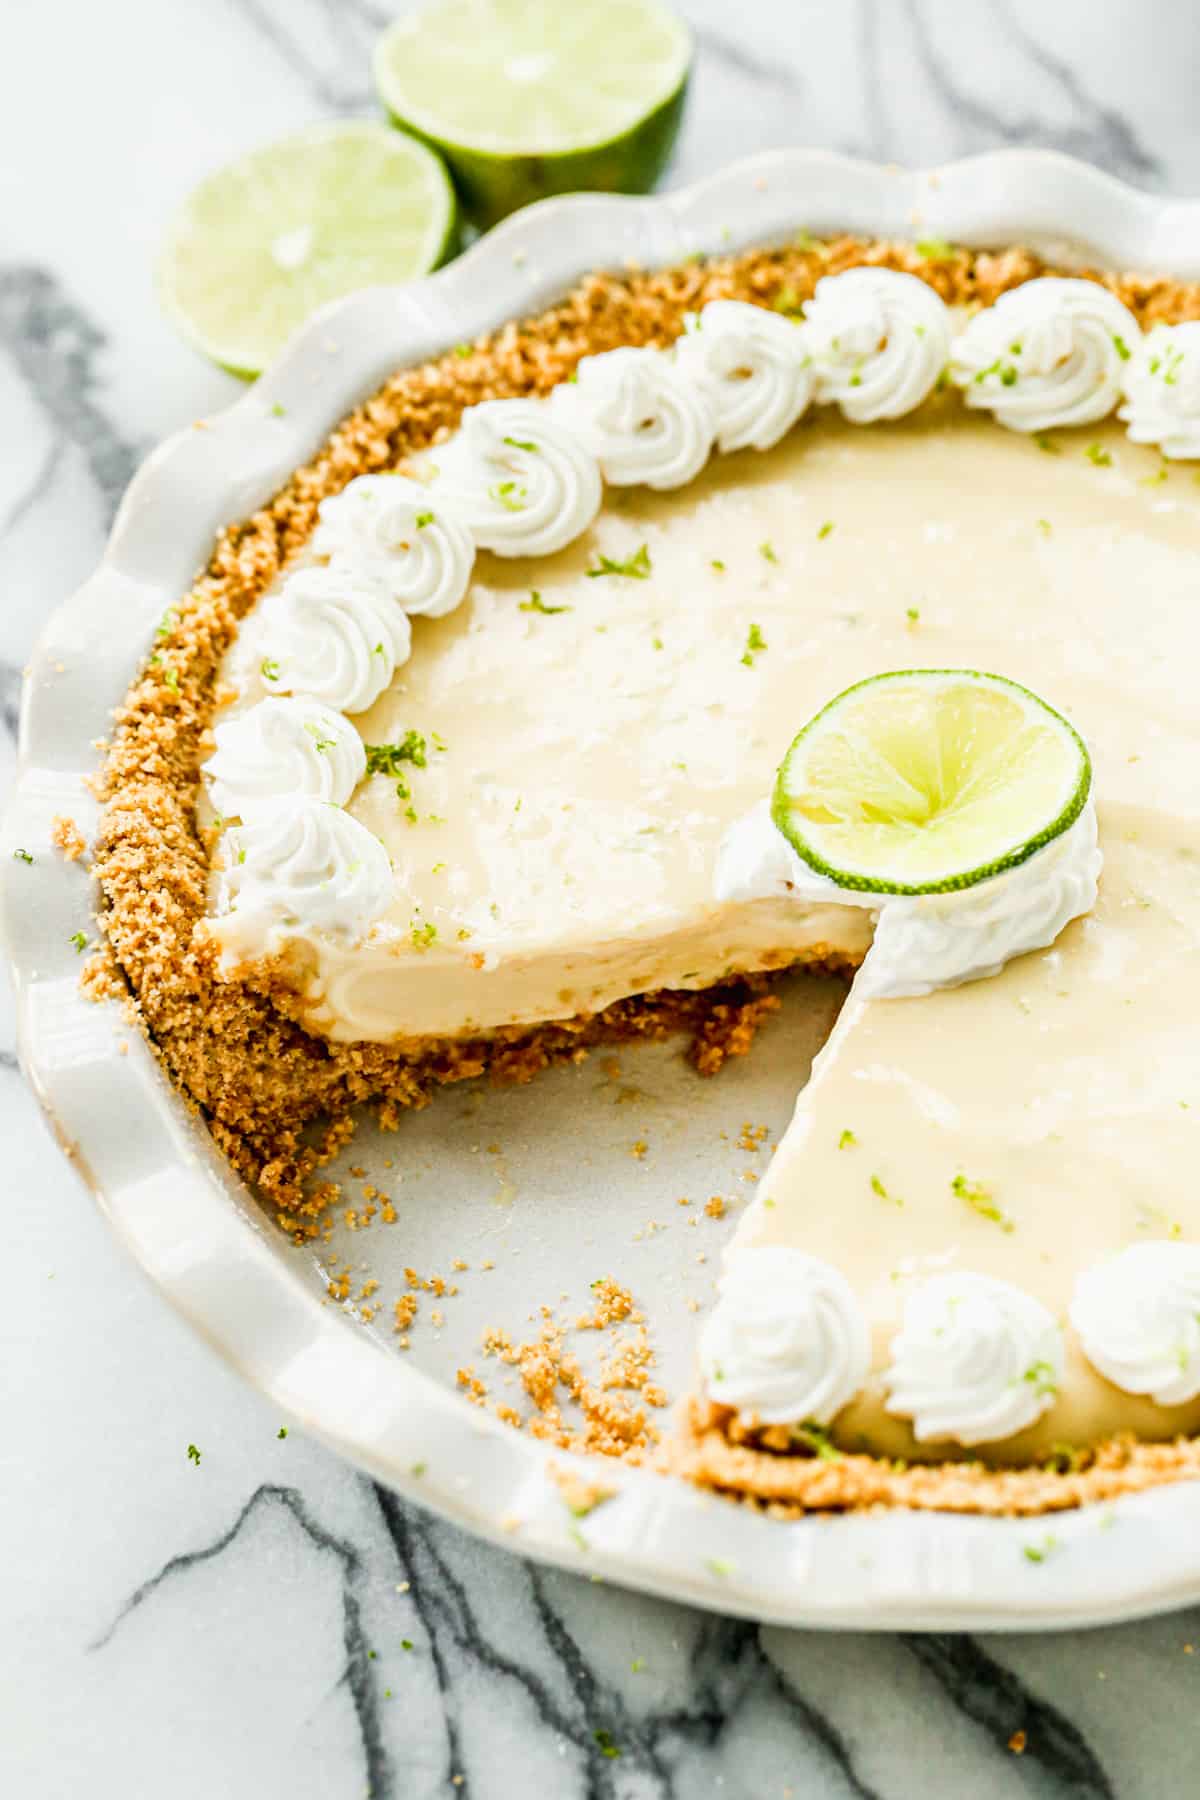 Homemade Key Lime Pie with one slice taken out.